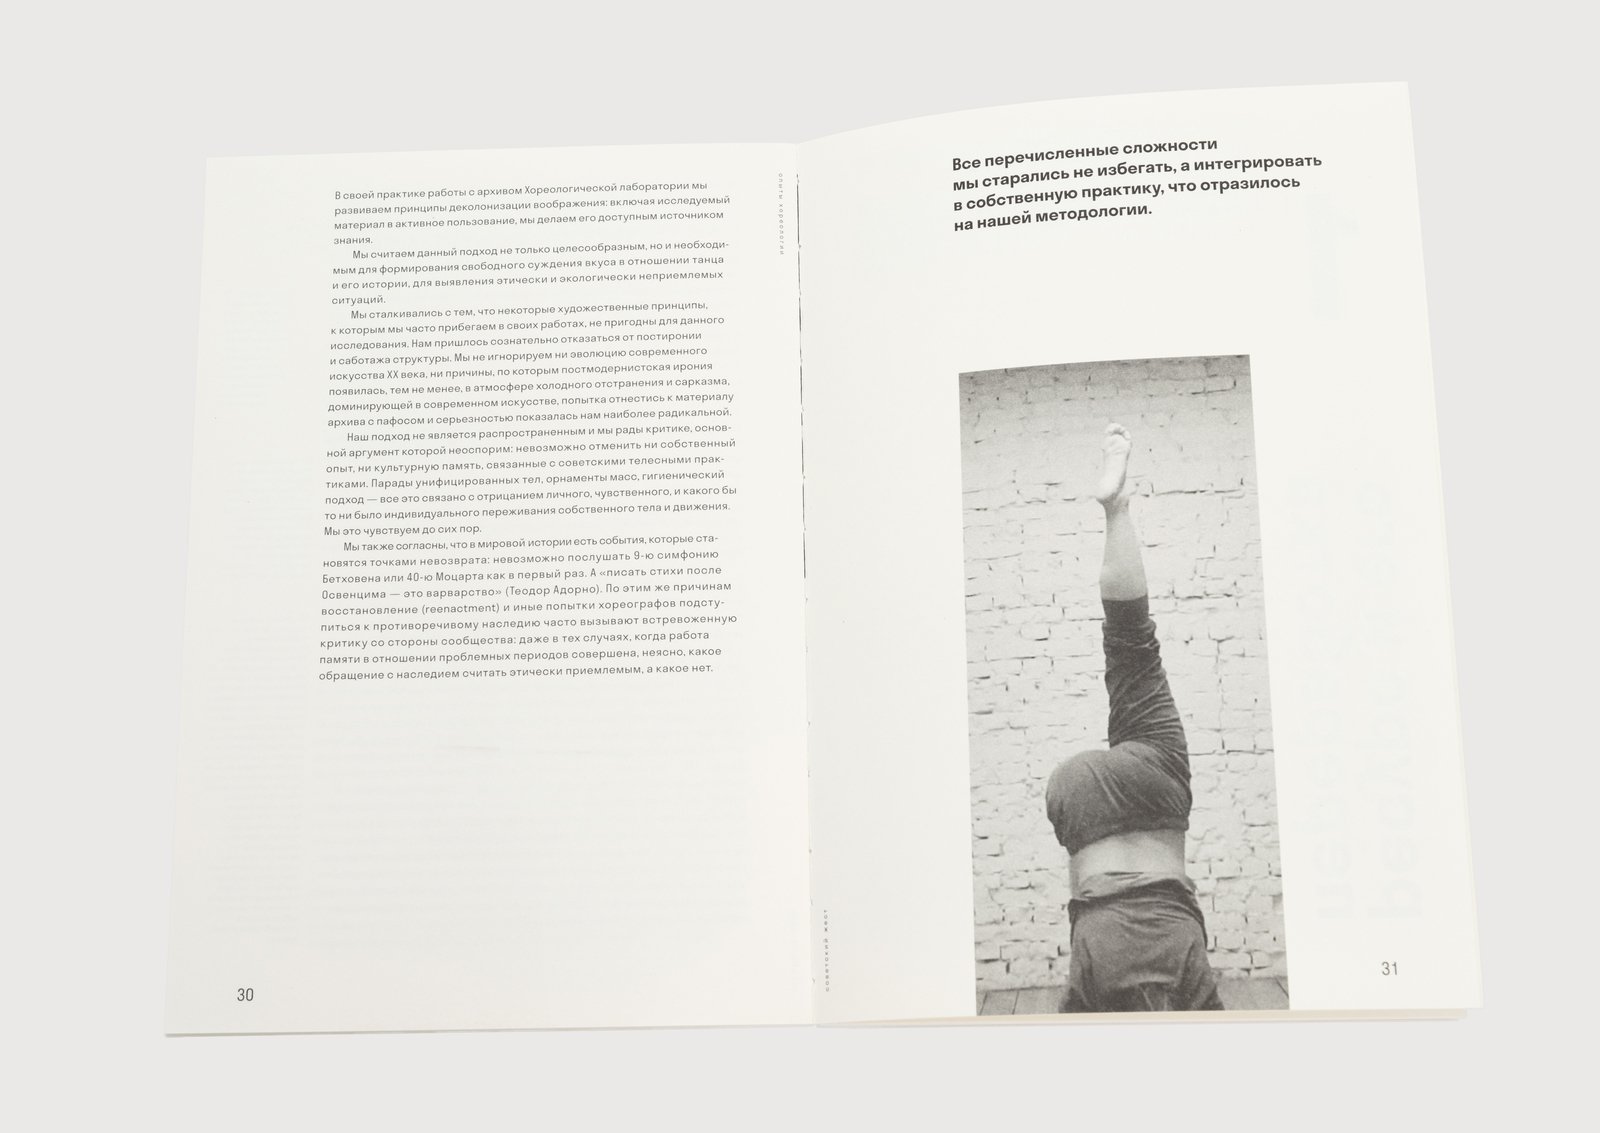 Daria Plokhova, Alexandra PortyannikovaManual for the Practical Use of a Dance Archive: Experiments in Choreology, or Where the Soviet Gesture Has Led UsGarage Museum of Contemporary Art, 2020